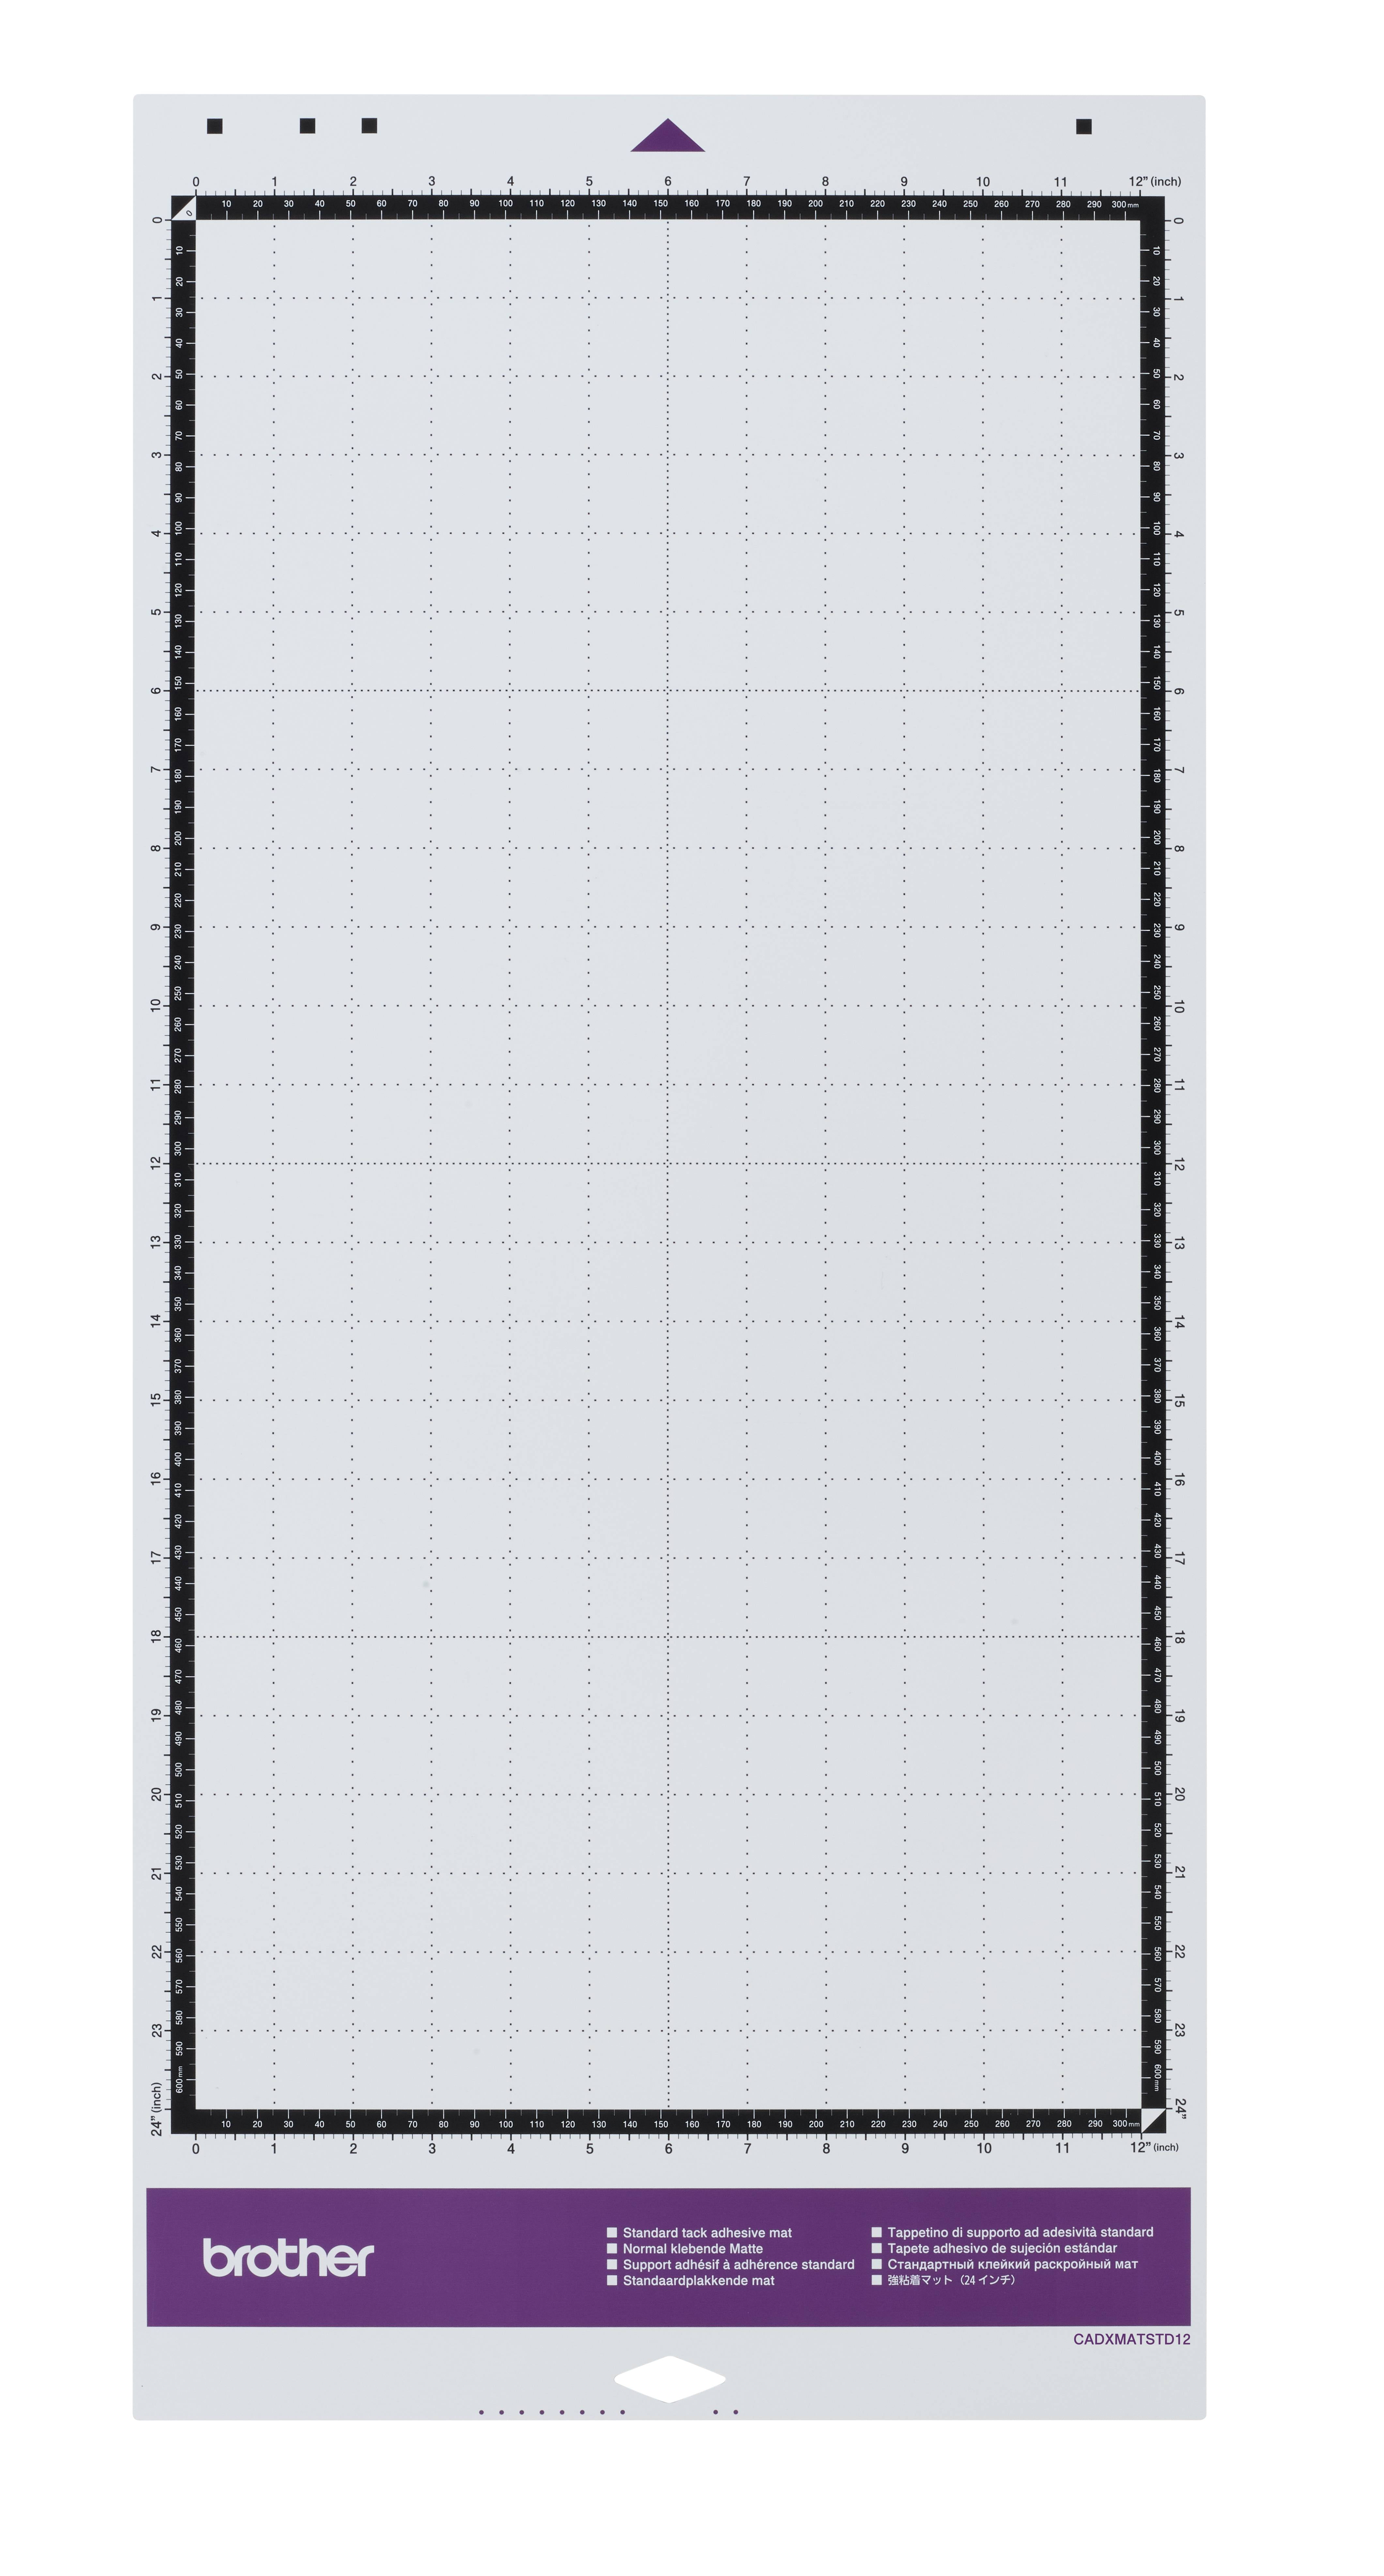 Artistix Non Adhesive 12 x 24 Carrier Sheet Cutting Mat For The Brother Scan  N Cut ScanNCut - Artistix Direct